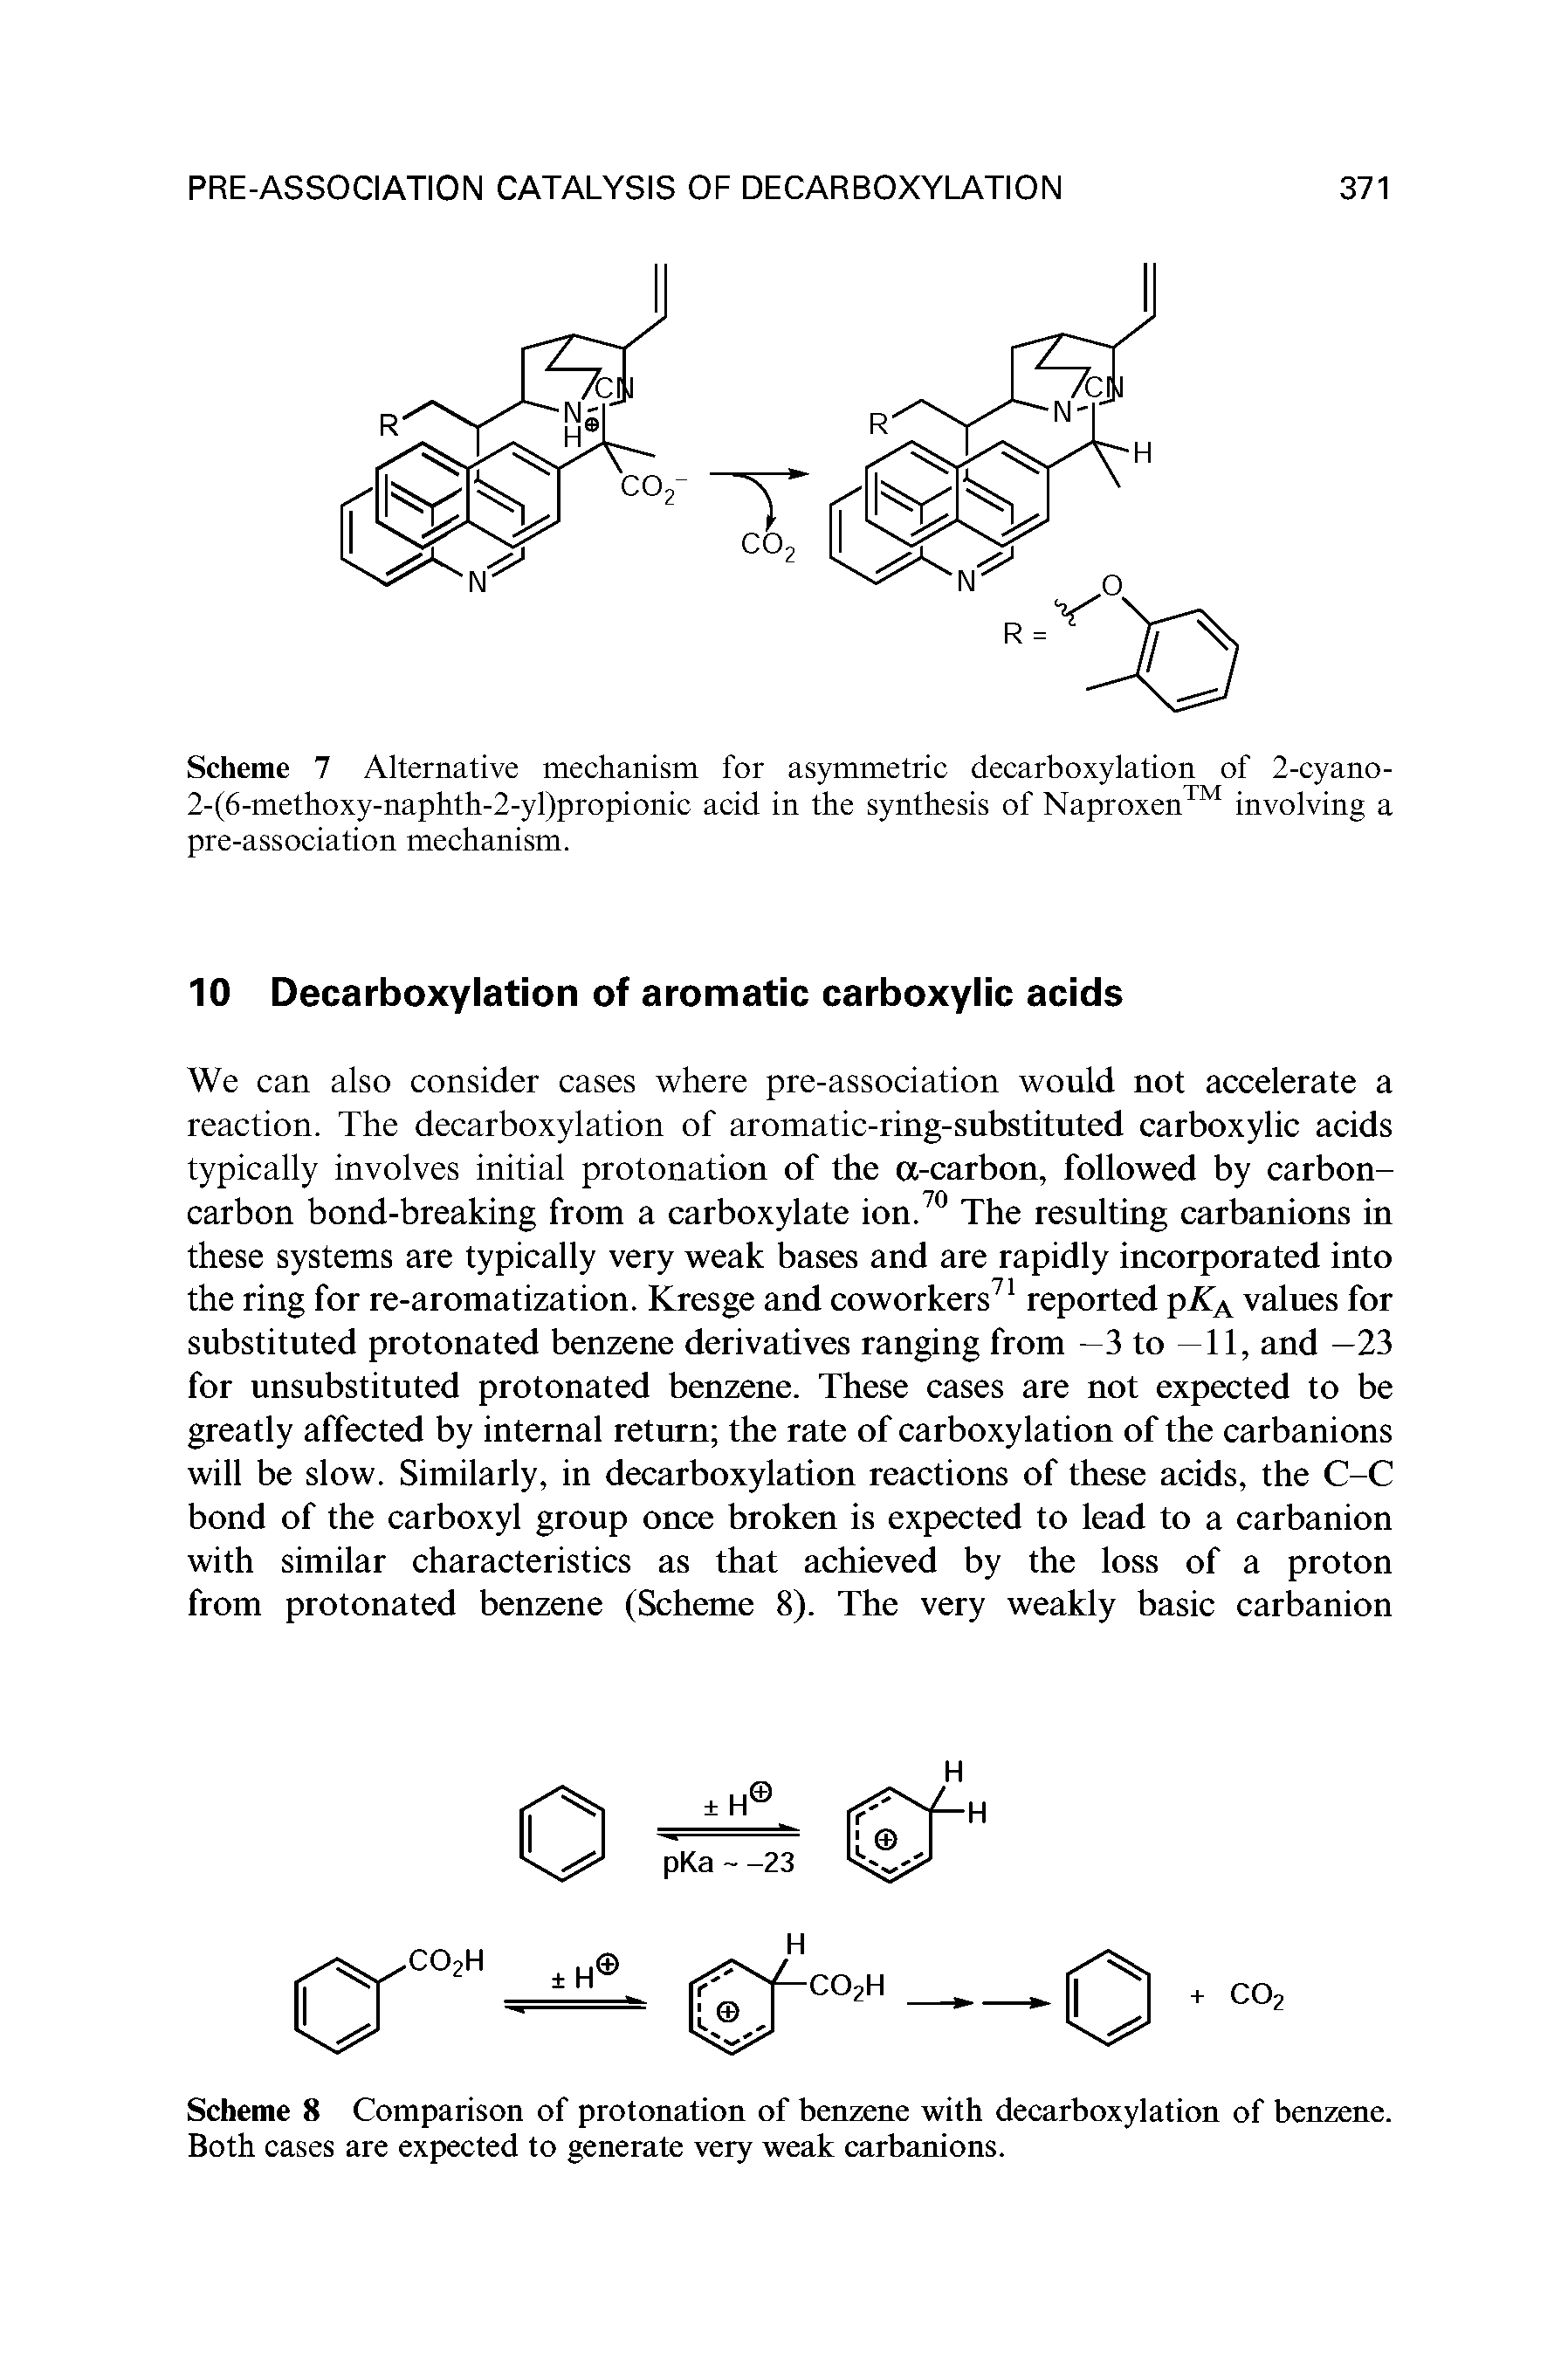 Scheme 7 Alternative mechanism for asymmetric decarboxylation of 2-cyano-2-(6-methoxy-naphth-2-yl)propionic acid in the synthesis of Naproxen involving a pre-association mechanism.